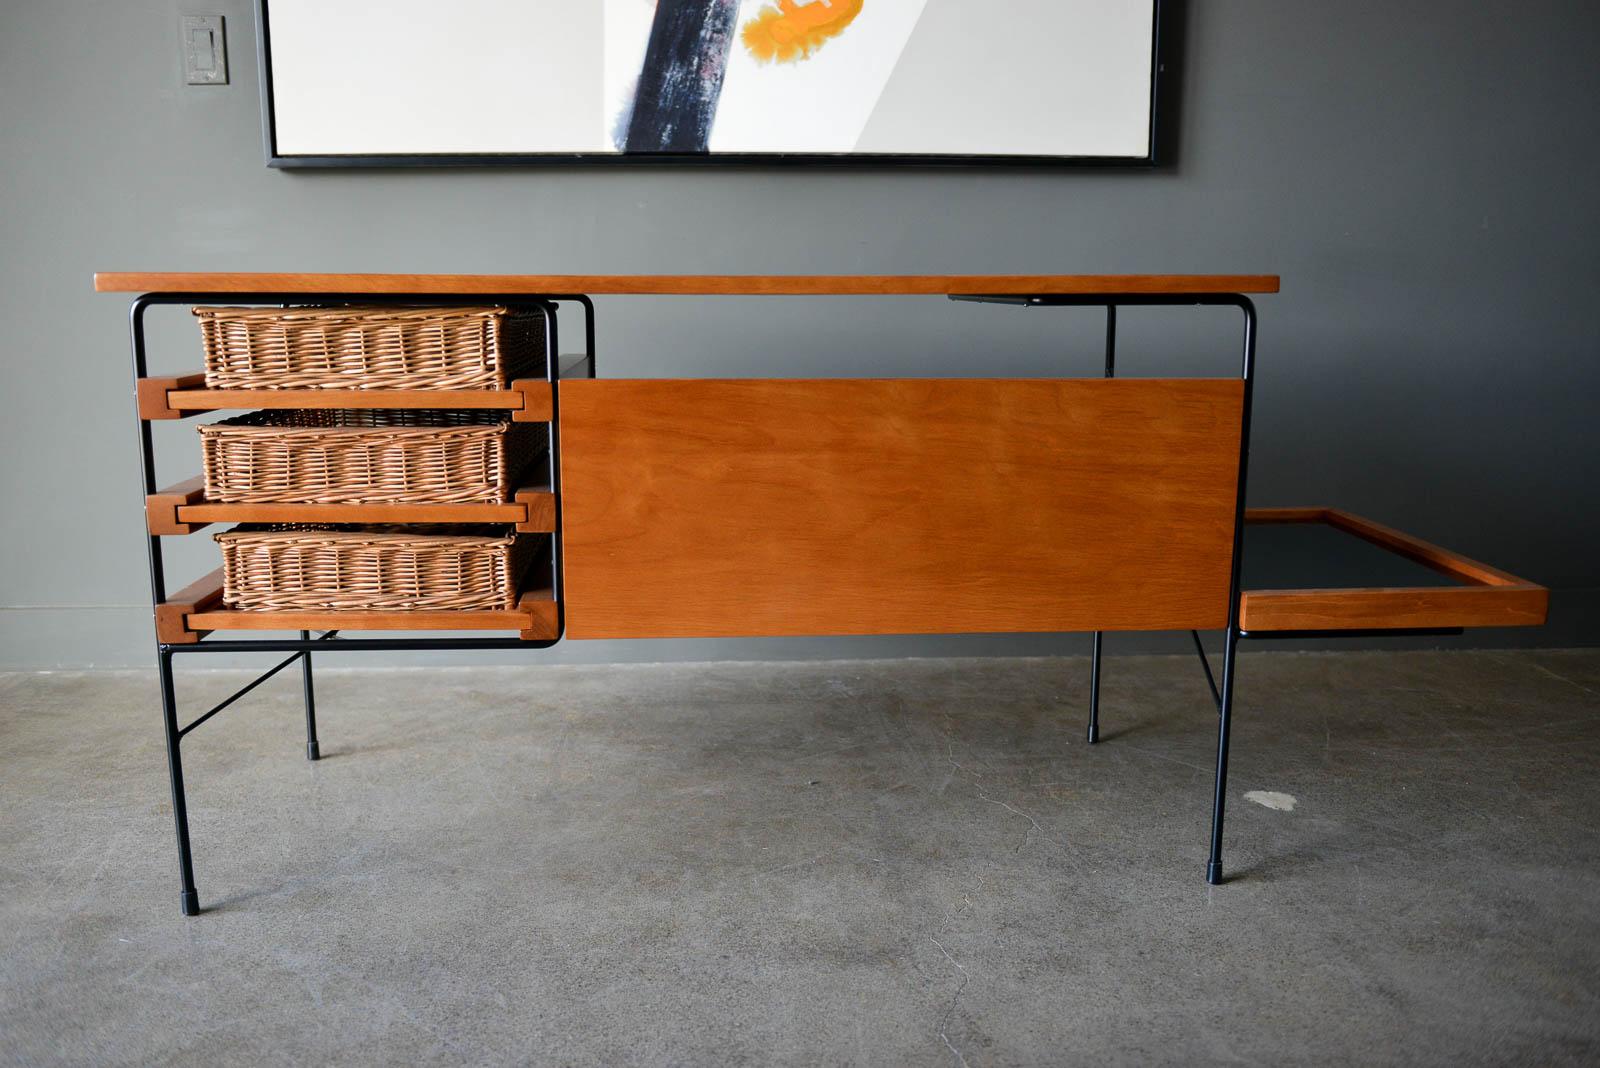 Maple and iron desk by Dorothy Schindele for Modern Color, circa 1950. From the Pacifica Line by Modern Color of California. Original willow side baskets on sliding drawers. Smoked glass shelf for books or additional storage. Extremely rare, hard to